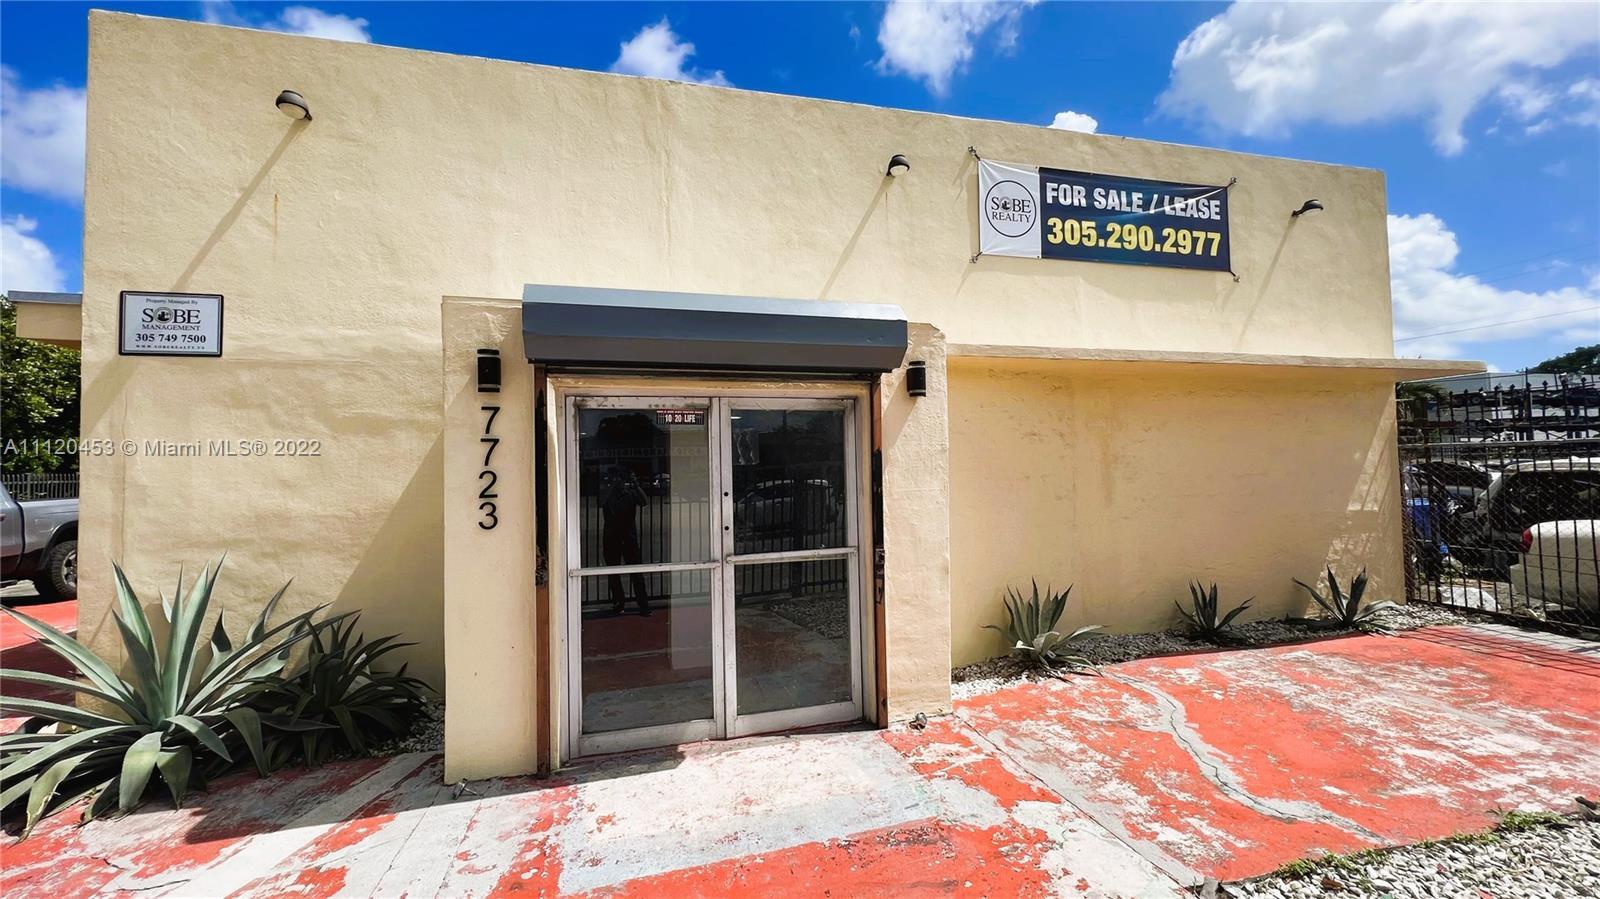 Photo of 7723 NW 27th Ave in Miami, FL